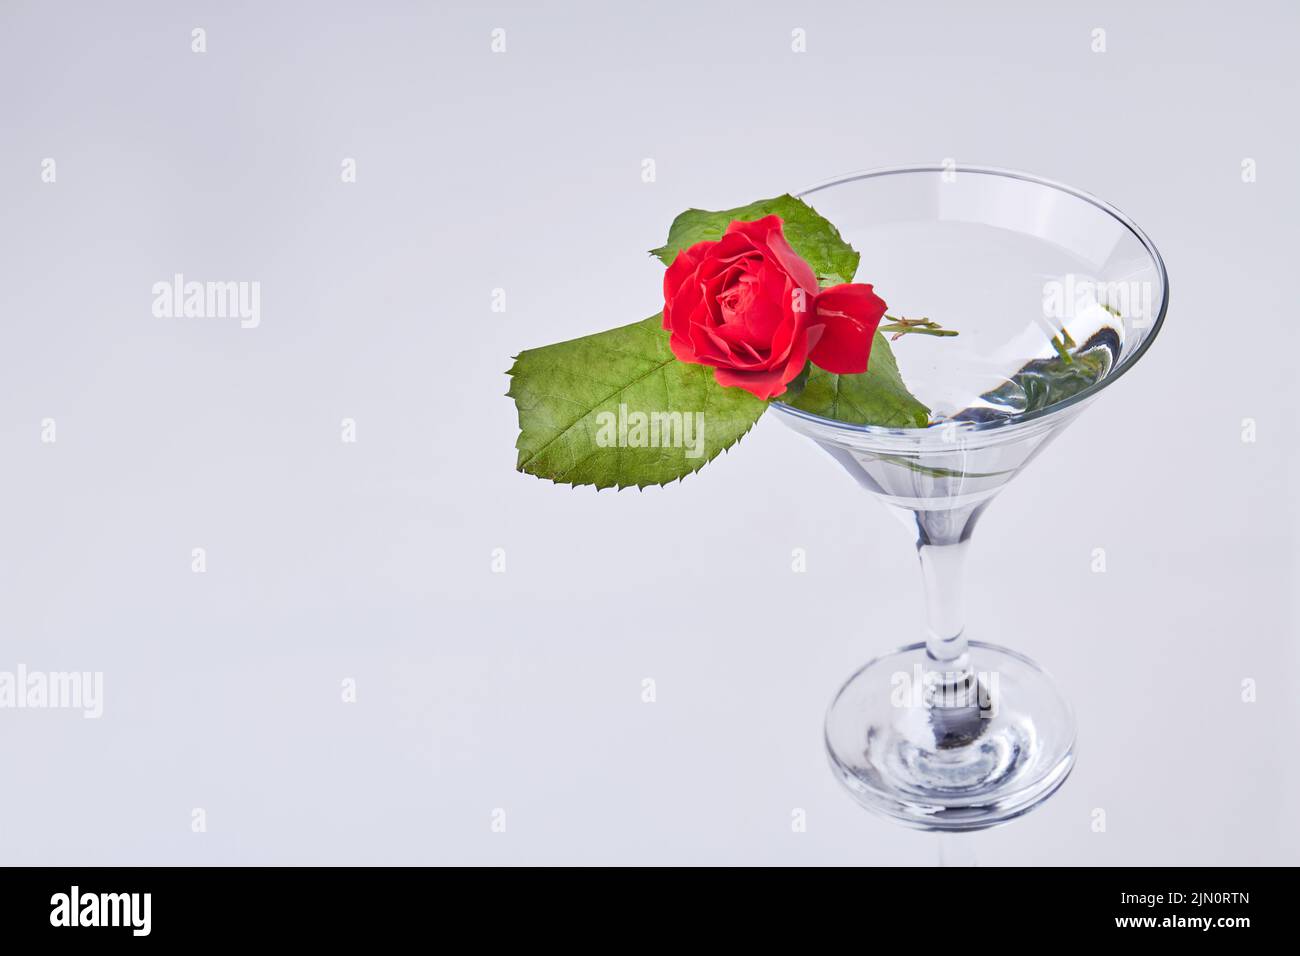 Red flower in a cocktail glass and copy space. Isolated on white background. Stock Photo